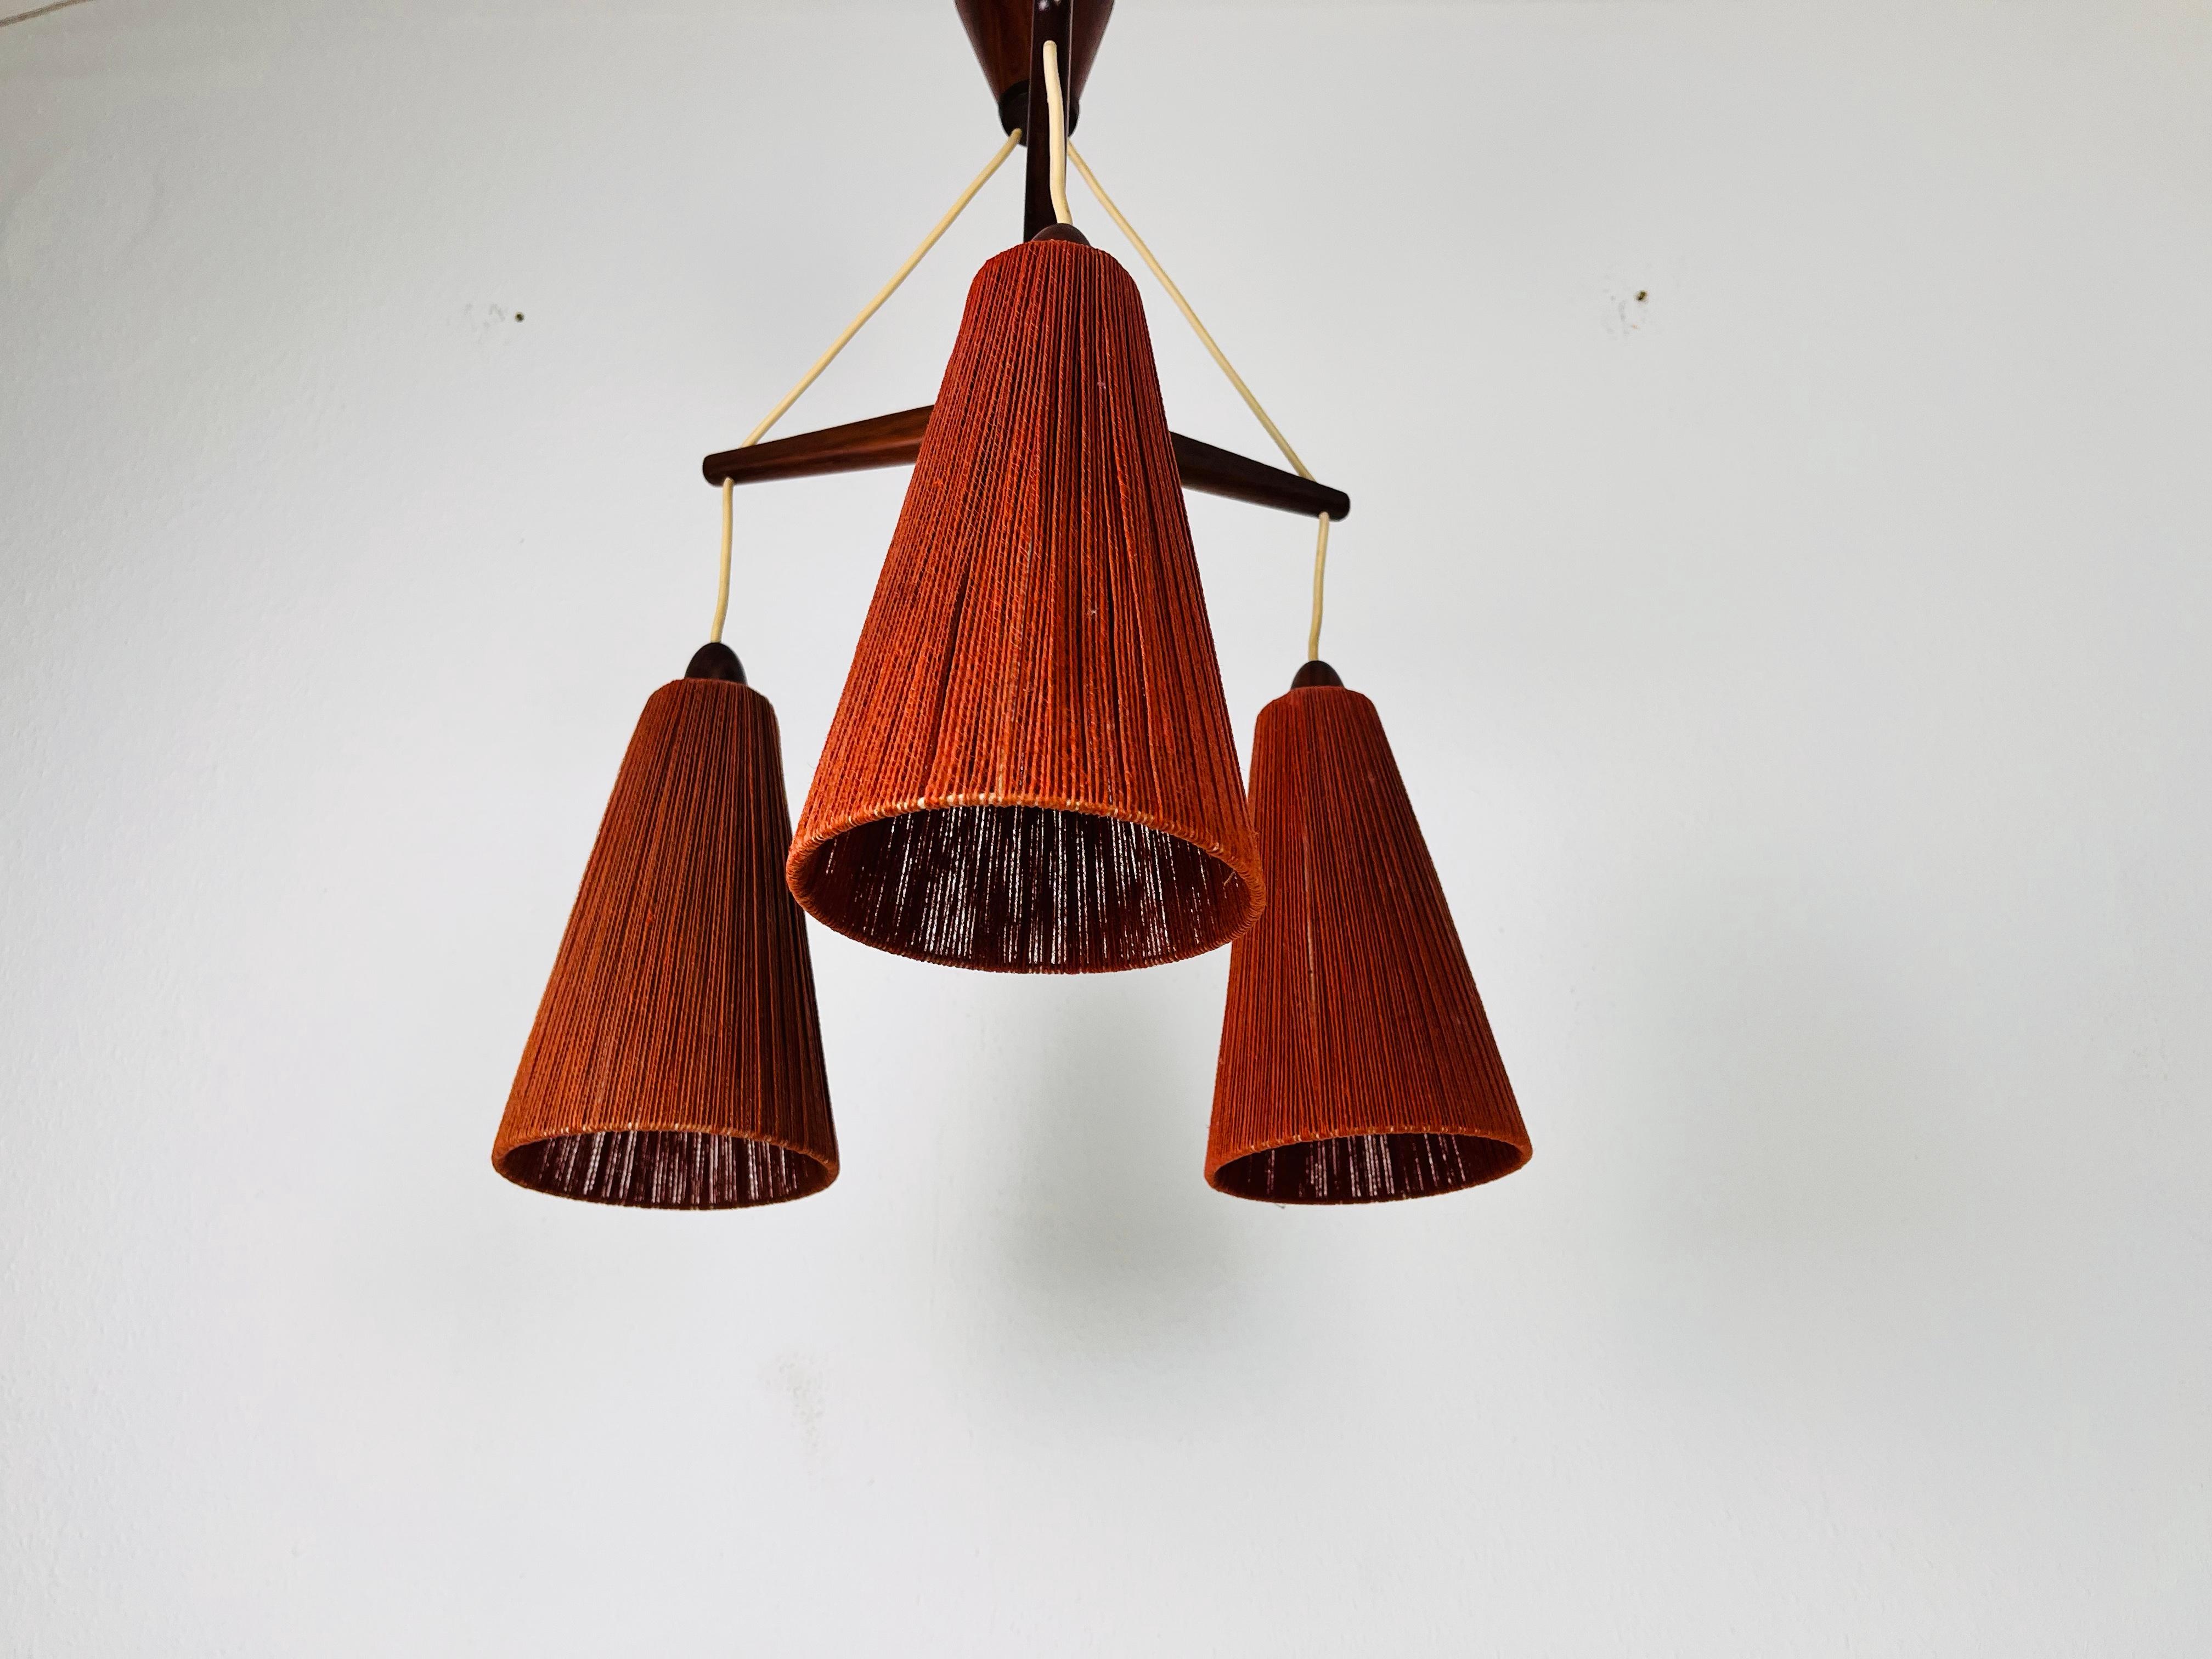 A wonderful suisse teak hanging lamp made by Temde in the 1960s. It is fascinating with its rare cone lamp shades. The body of the lamp is made of teak.

The light requires three E27 light bulbs. Works with both 120V/220V. Very good vintage